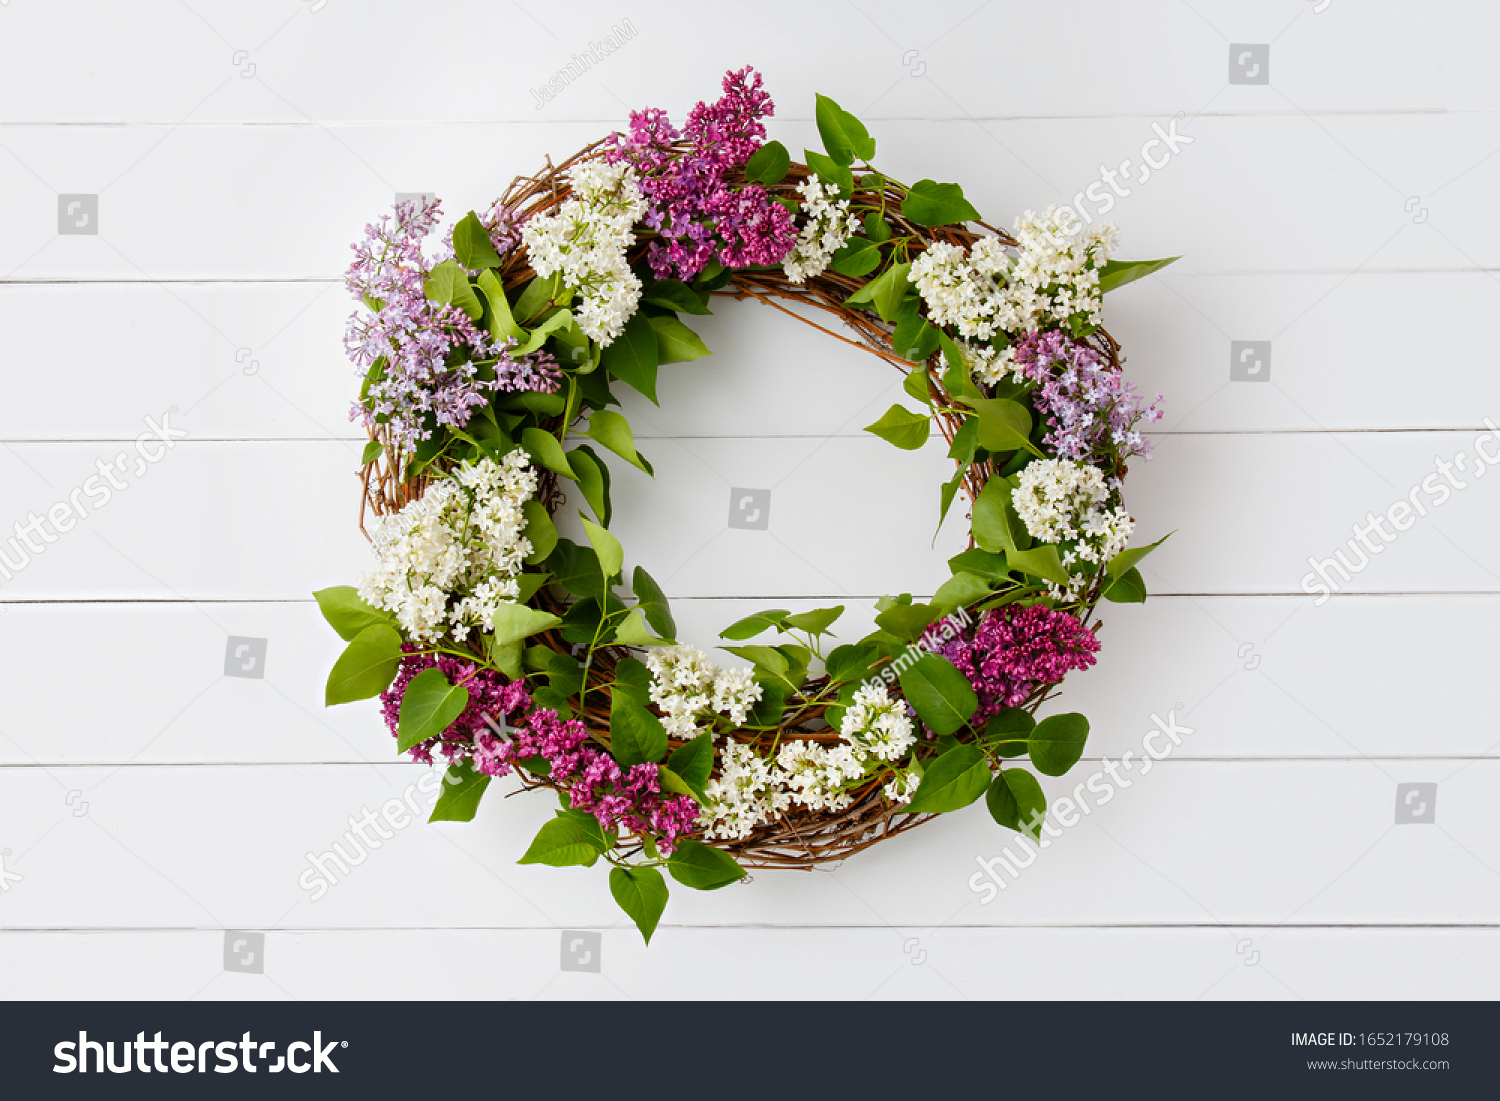 Wreath from purple lilac flowers on white wooden background. Surprise for lovely woman. Natural spring style. Aromatherapy.  Flowers Flat lay, top view. Background with copy space. Spring blossom mood #1652179108